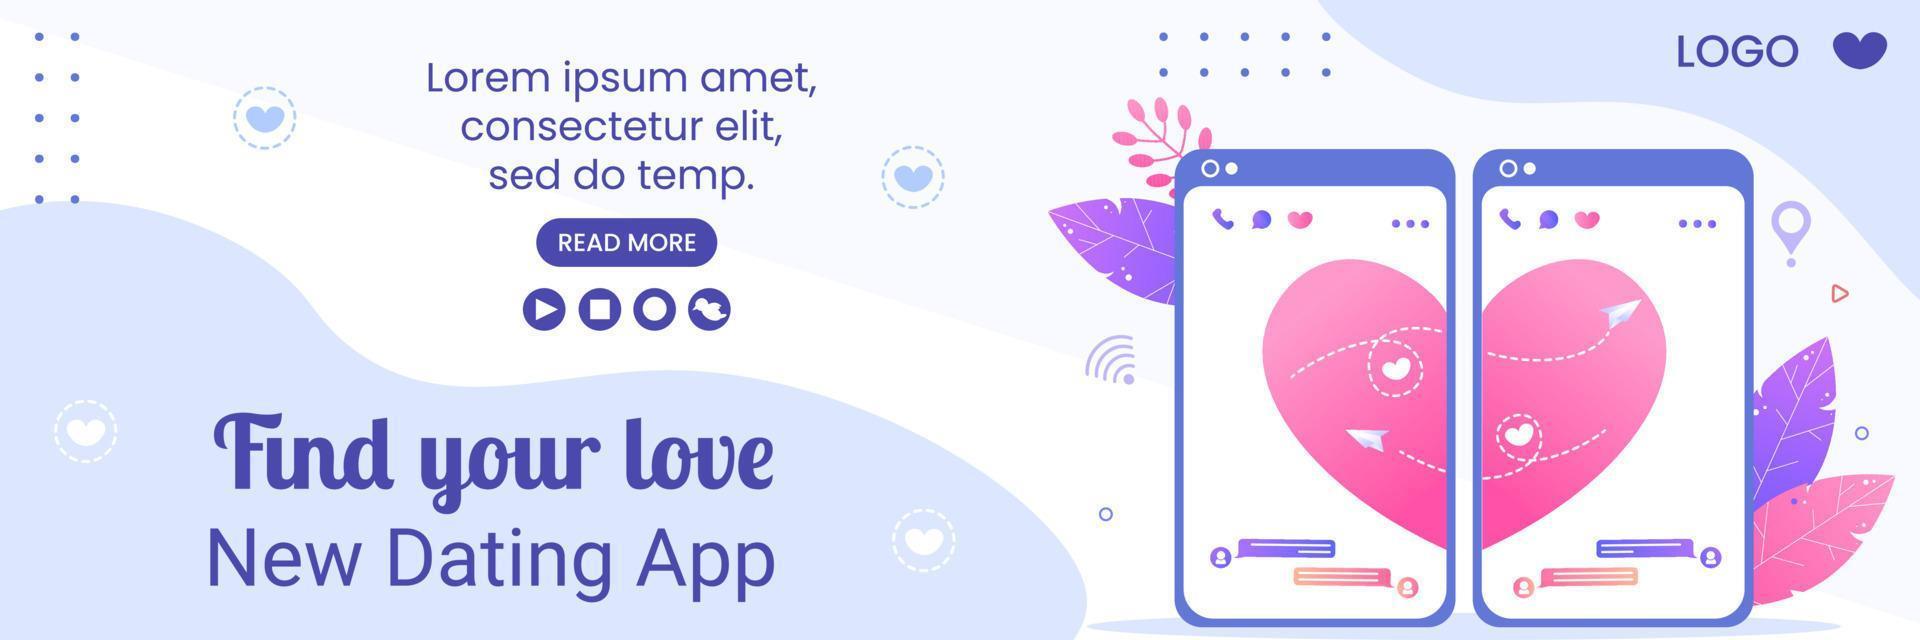 Dating App For a Love Match Cover Template Flat Design Illustration Editable of Square Background Suitable to Social Media or Valentine Greetings Card vector